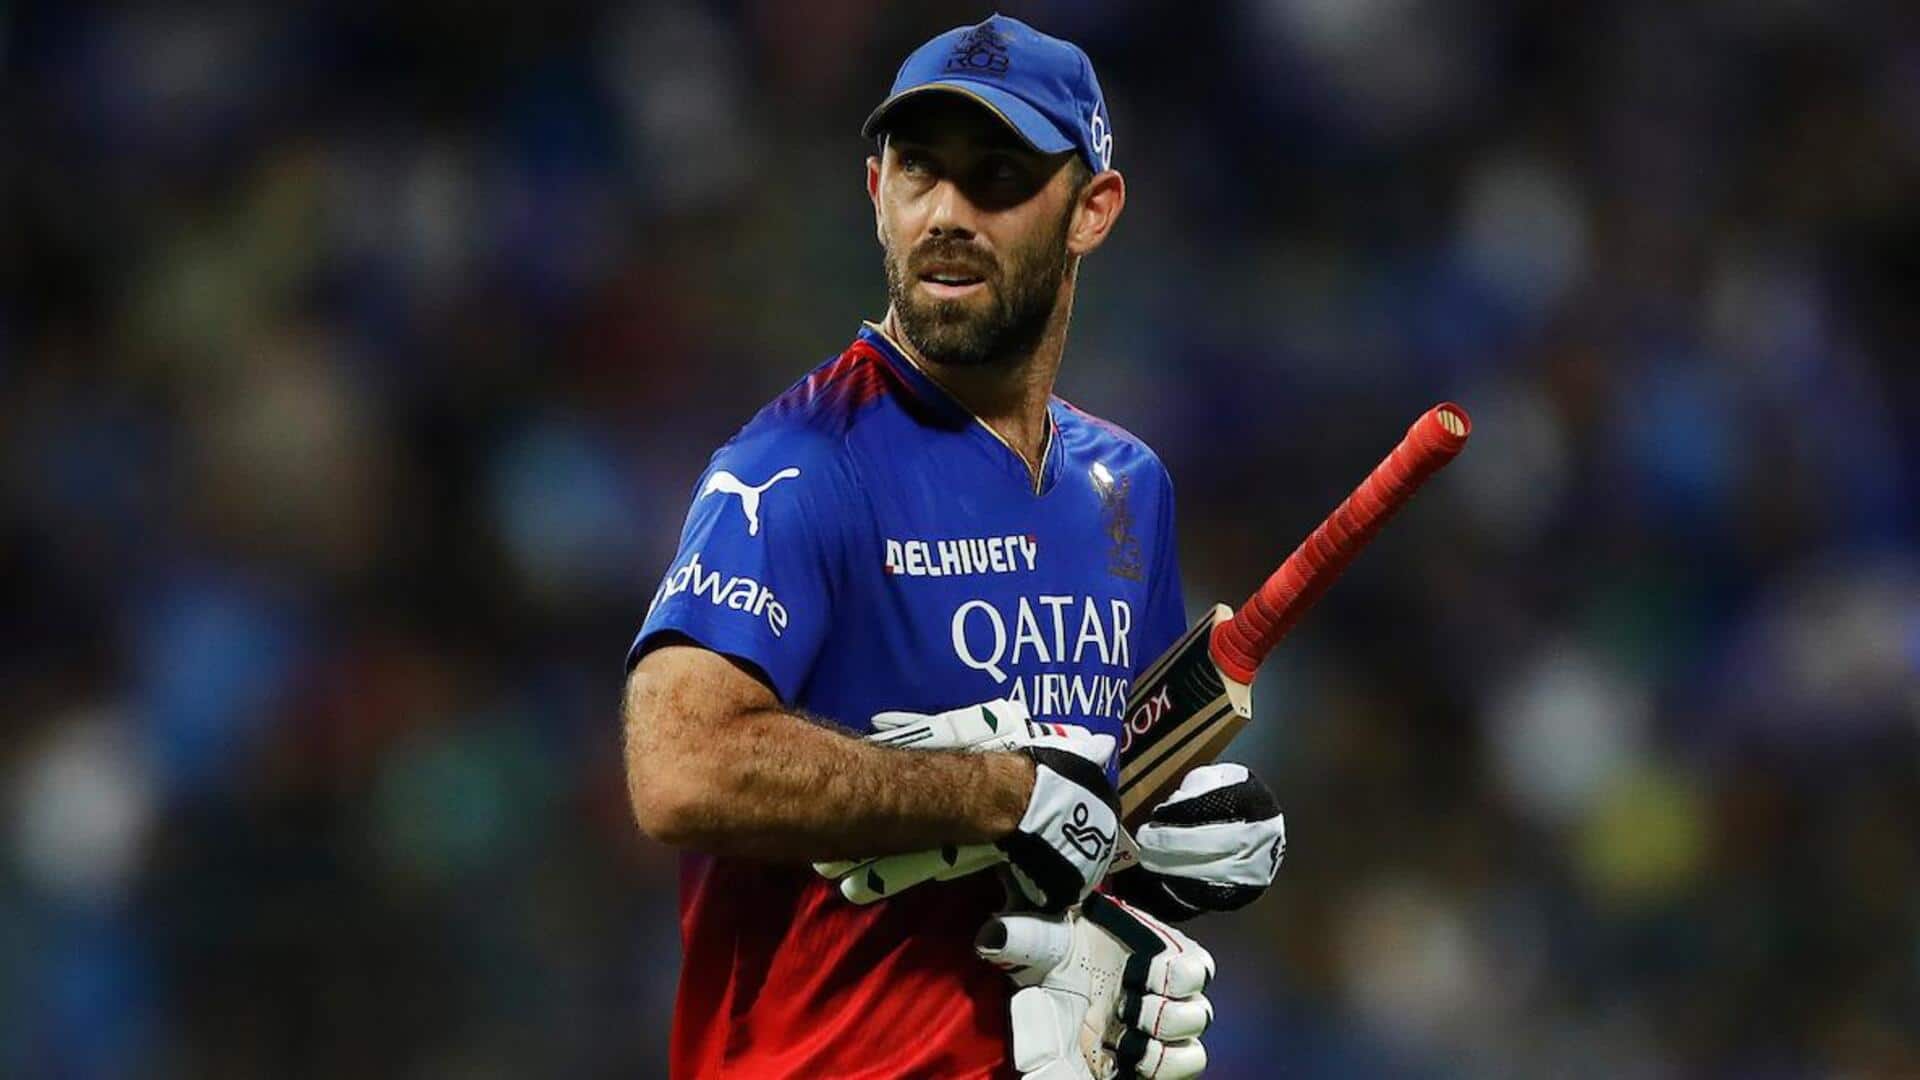 Glenn Maxwell equals this unwanted record in IPL: Details here